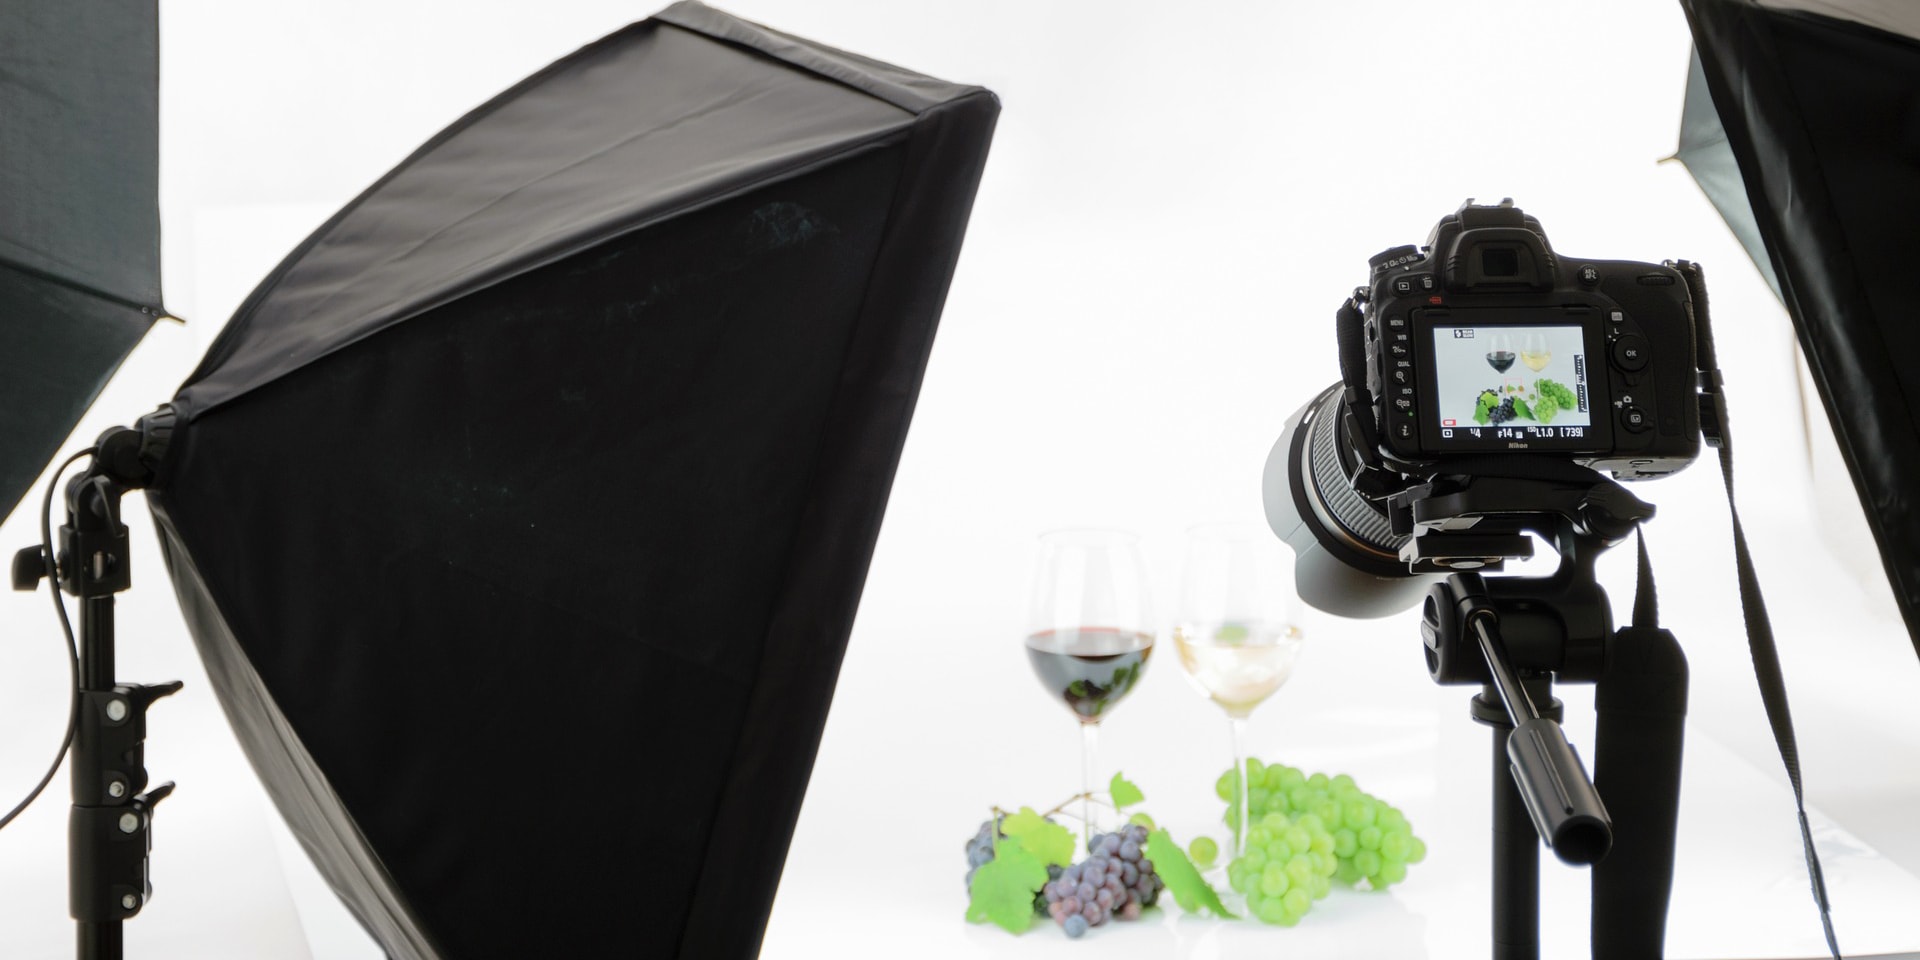 10 Best Product Photography Tips to Grow Your Career in 2022